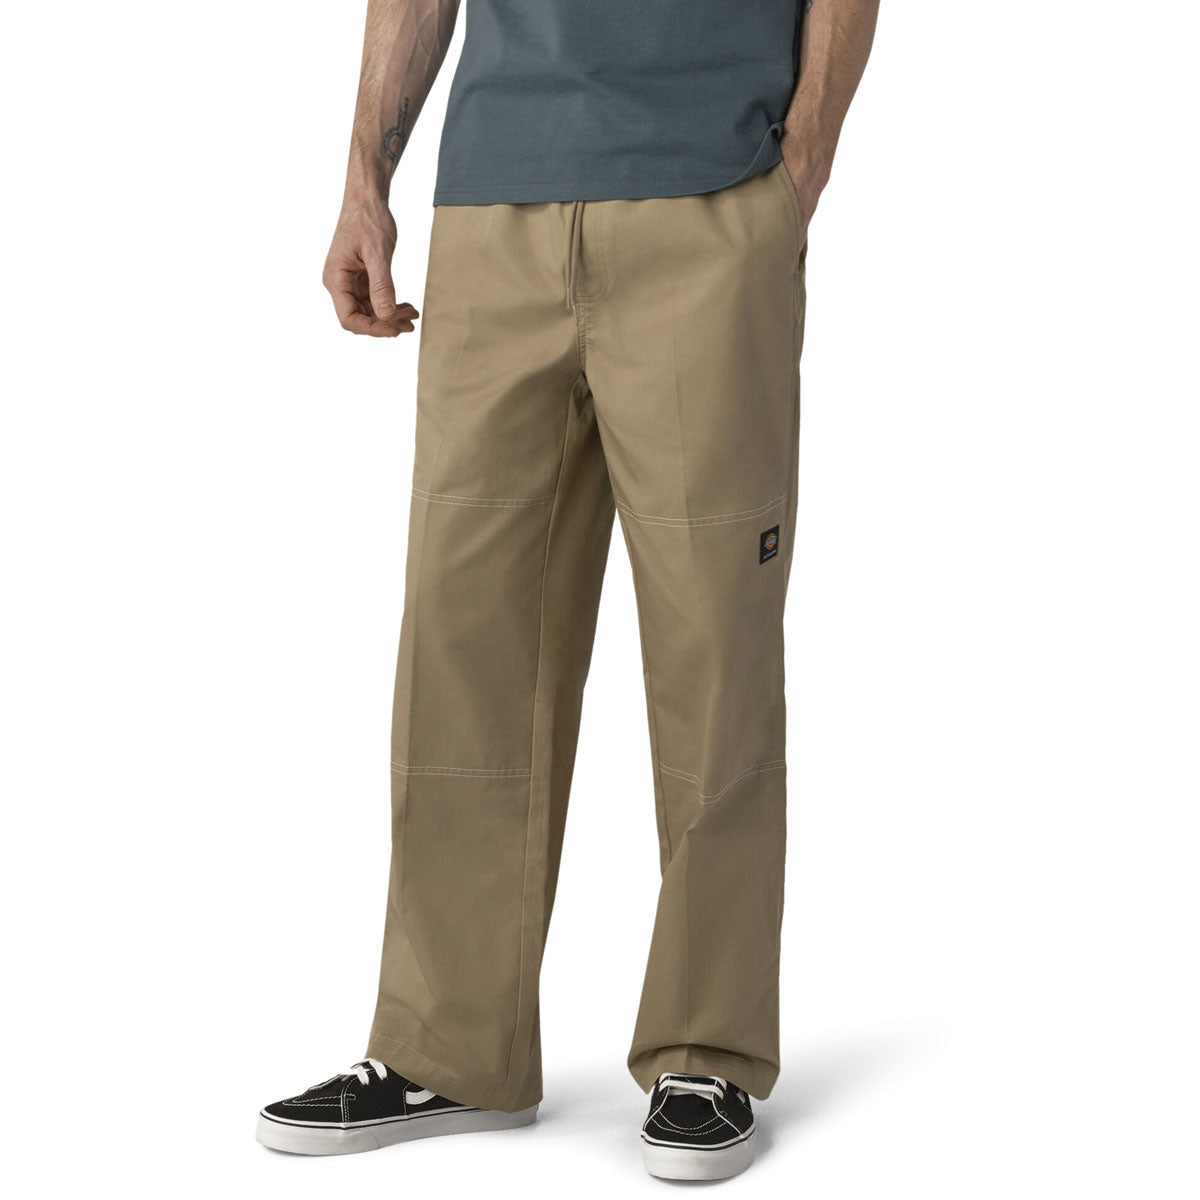 Dickies Summit Relaxed Fit Chef Pants - Desert Sand image 3